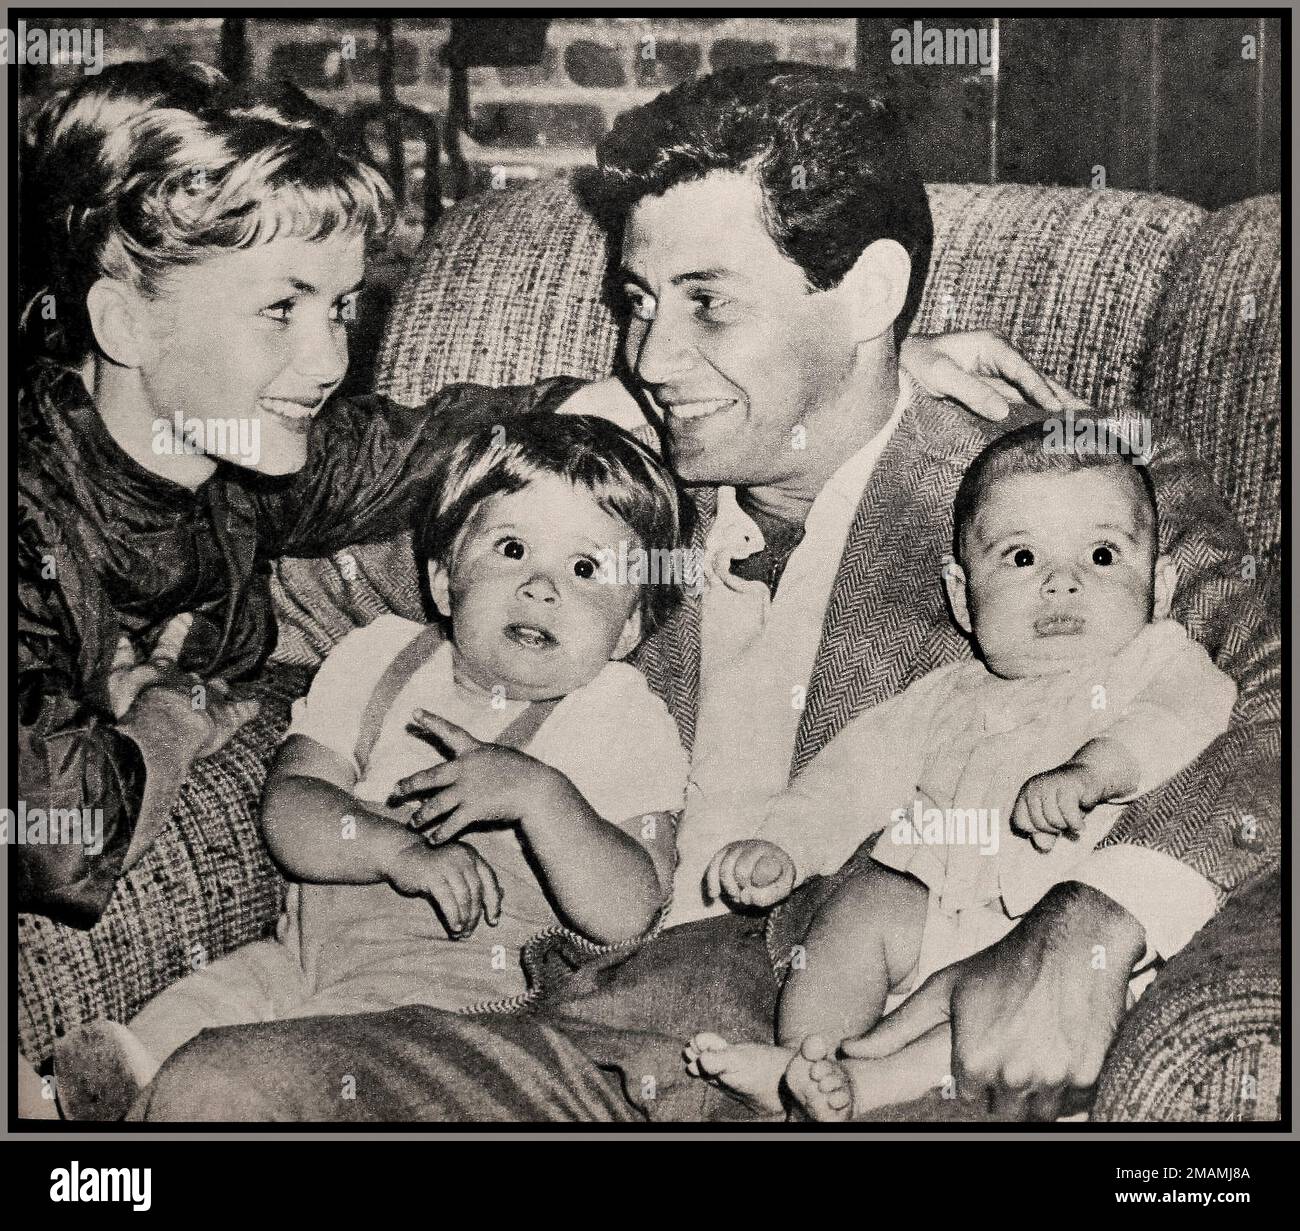 Vintage 1950s Hollywood Press Picture of Debbie Reynolds, Carrie Fisher, Eddie Fisher, and Todd Fisher at home 1958 settembre 1958 Modern Screen, Hollywood USA Foto Stock